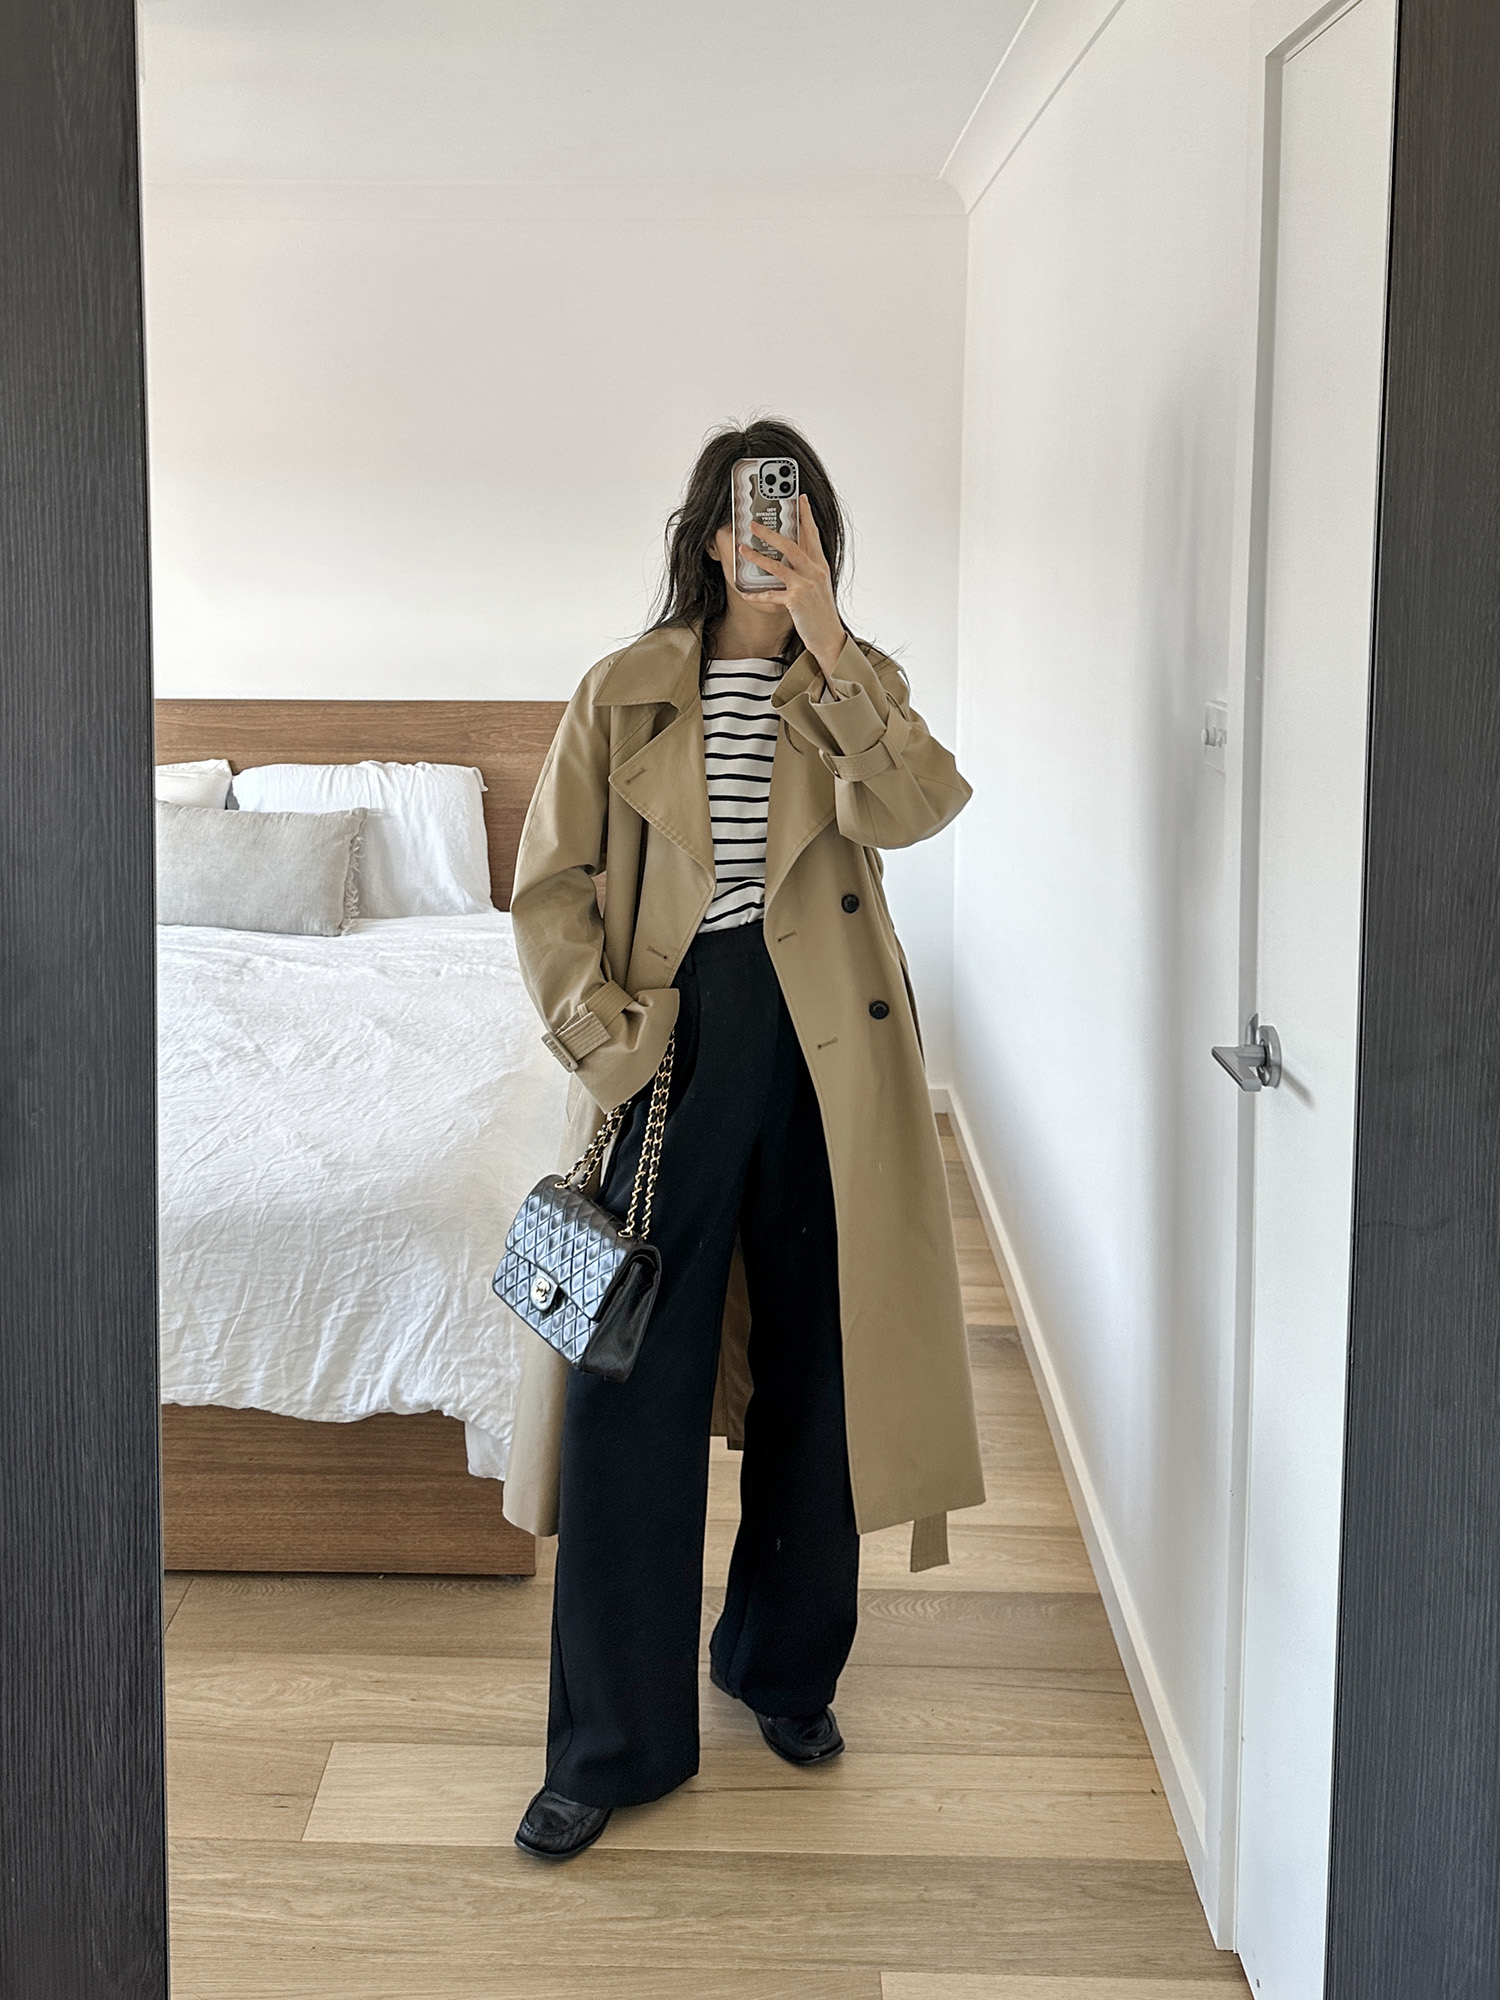 Minimalist French Parisian style outfit wearing stripes black trousers and a trench coat